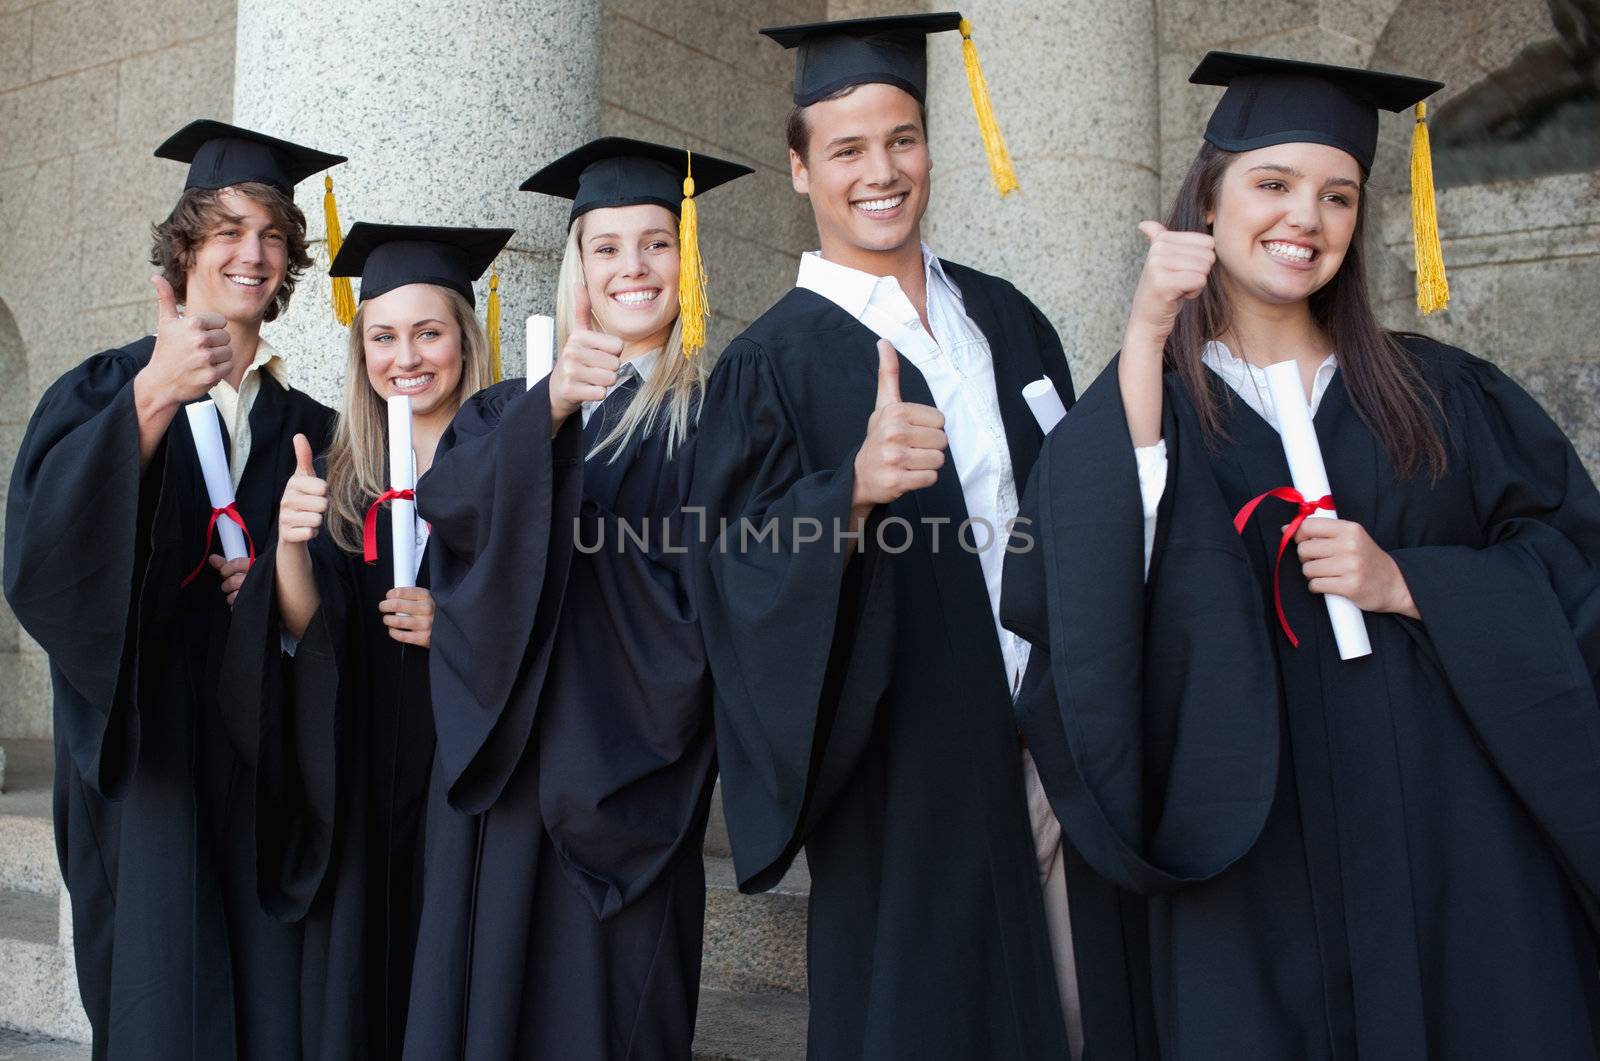 Graduates posing the thumb-up in front of the university